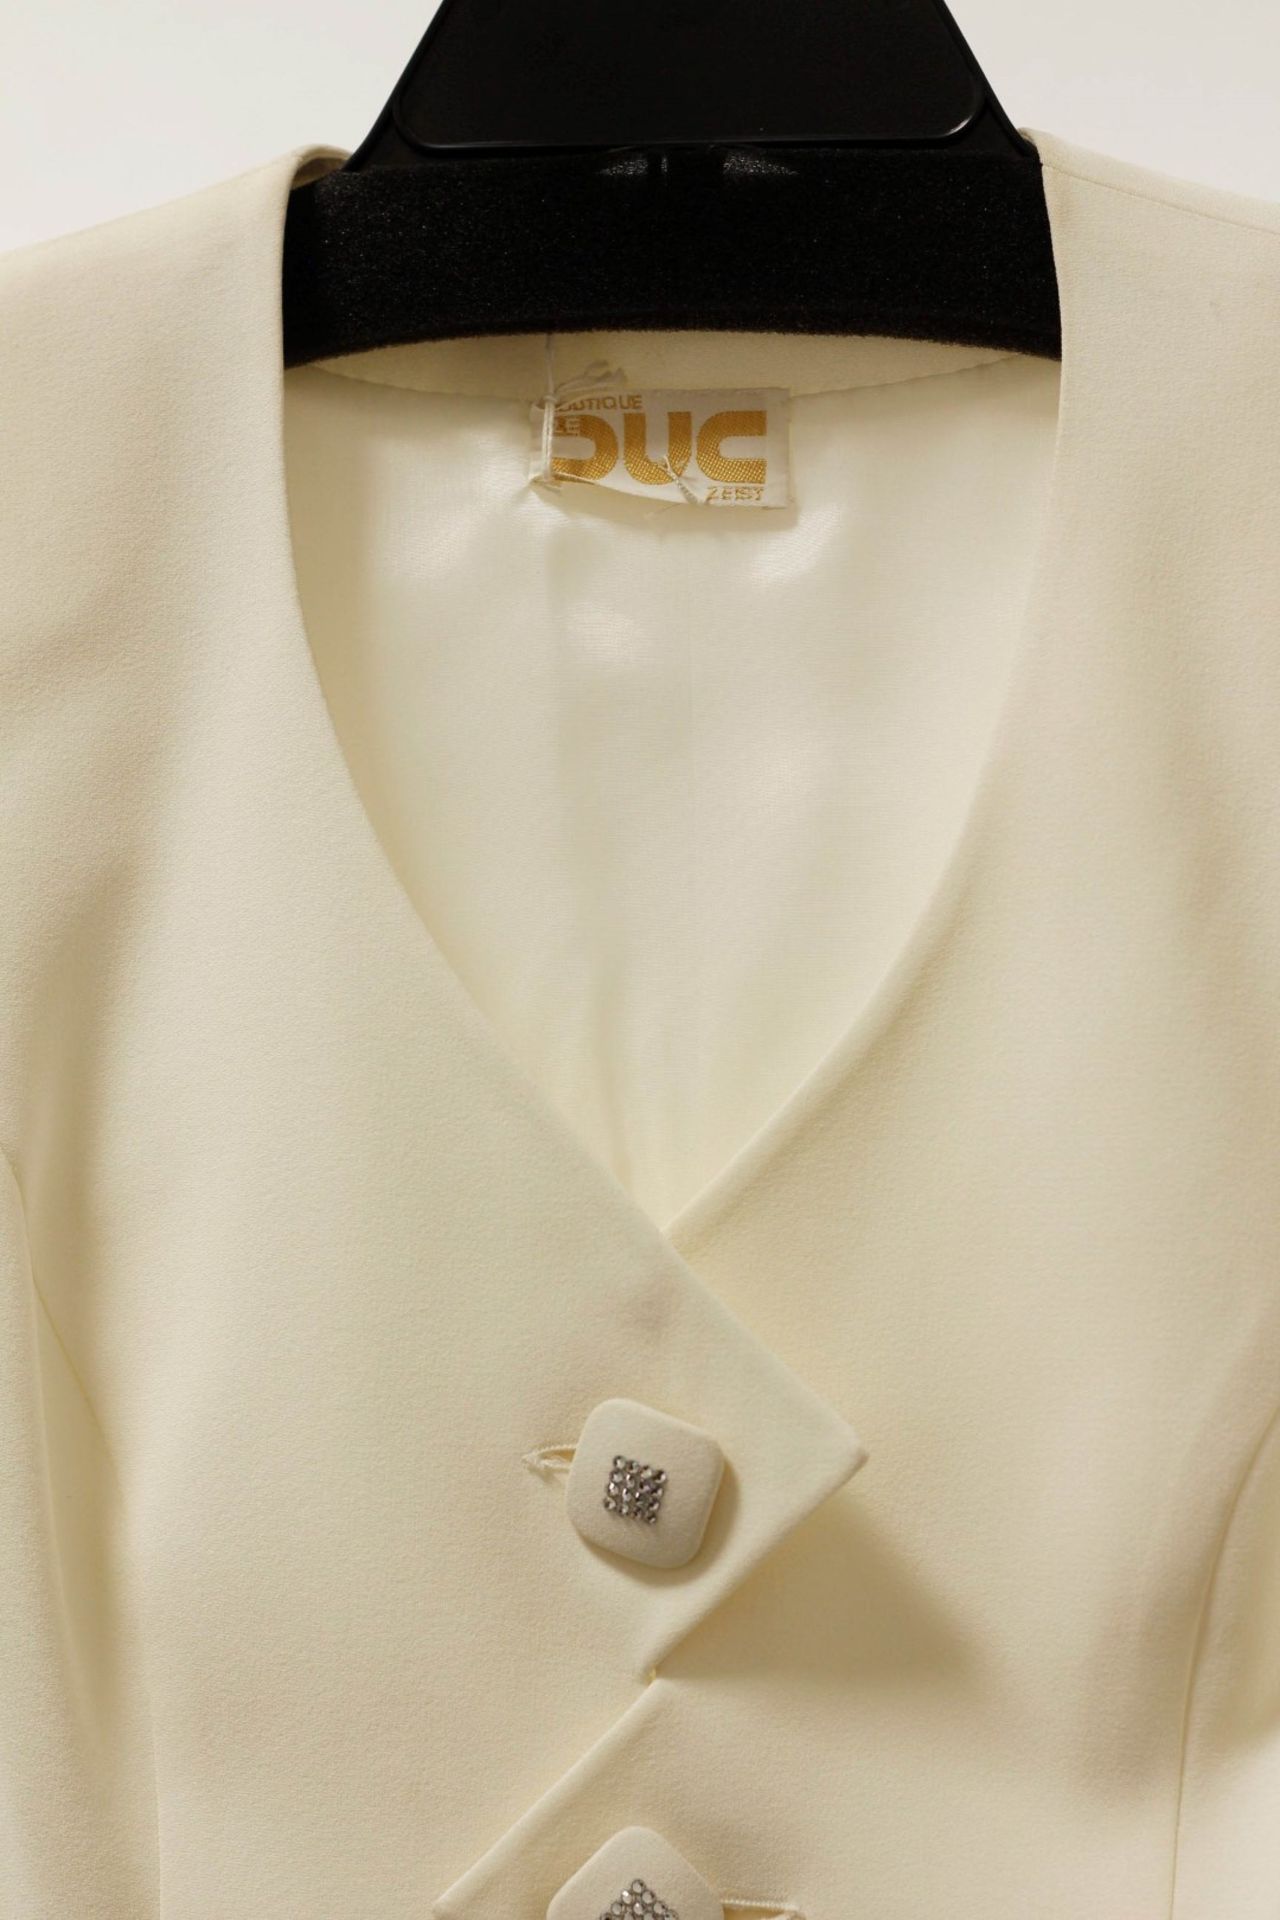 1 x Boutique Le Duc Cream Suit (Jacket And Trousers) - Size: 12 - Material: 82% Acetate, 18% Viscose - Image 2 of 13